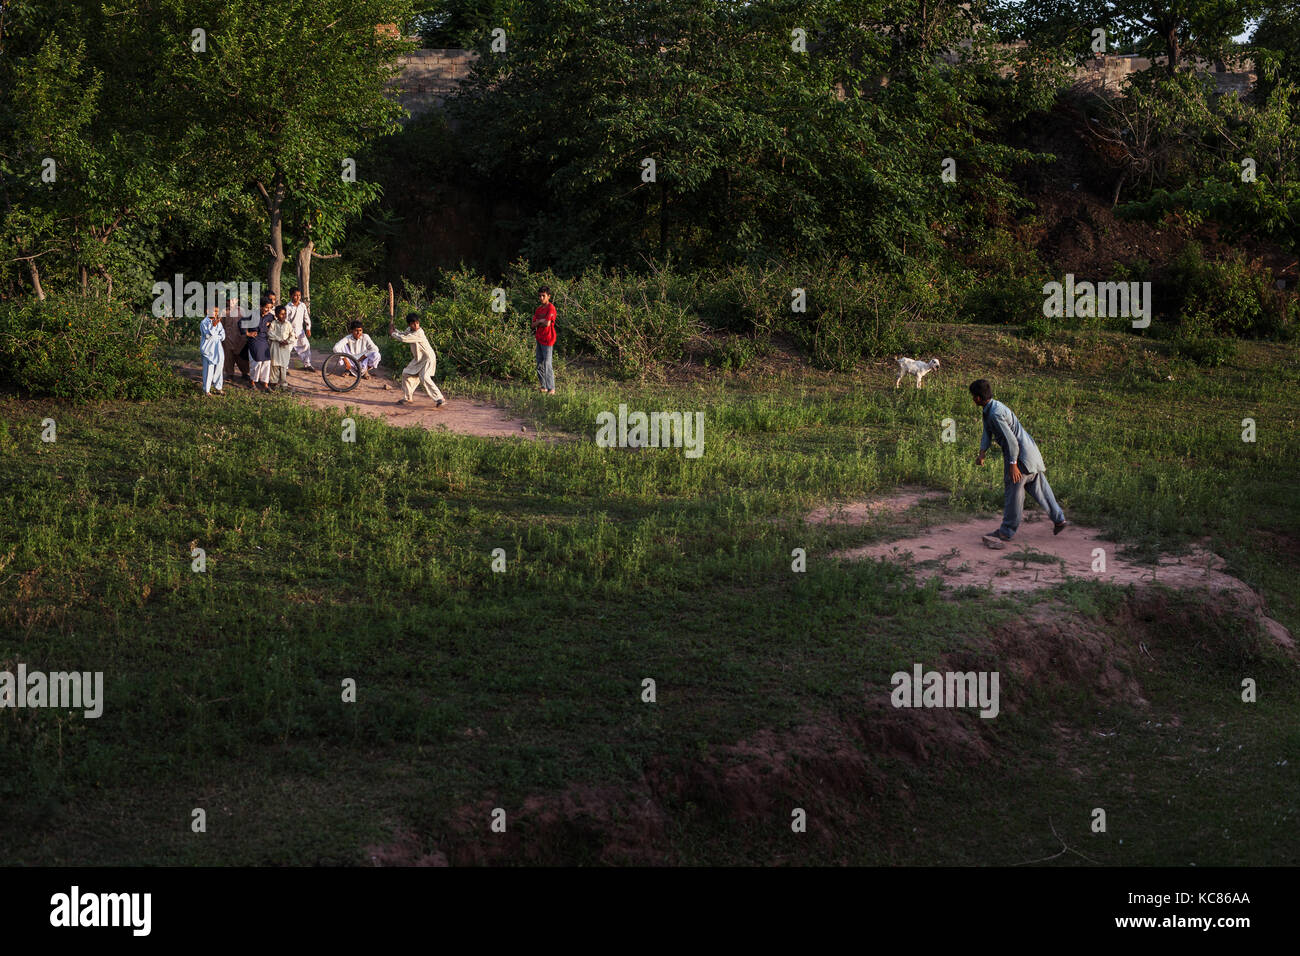 Cricket time in Village Stock Photo